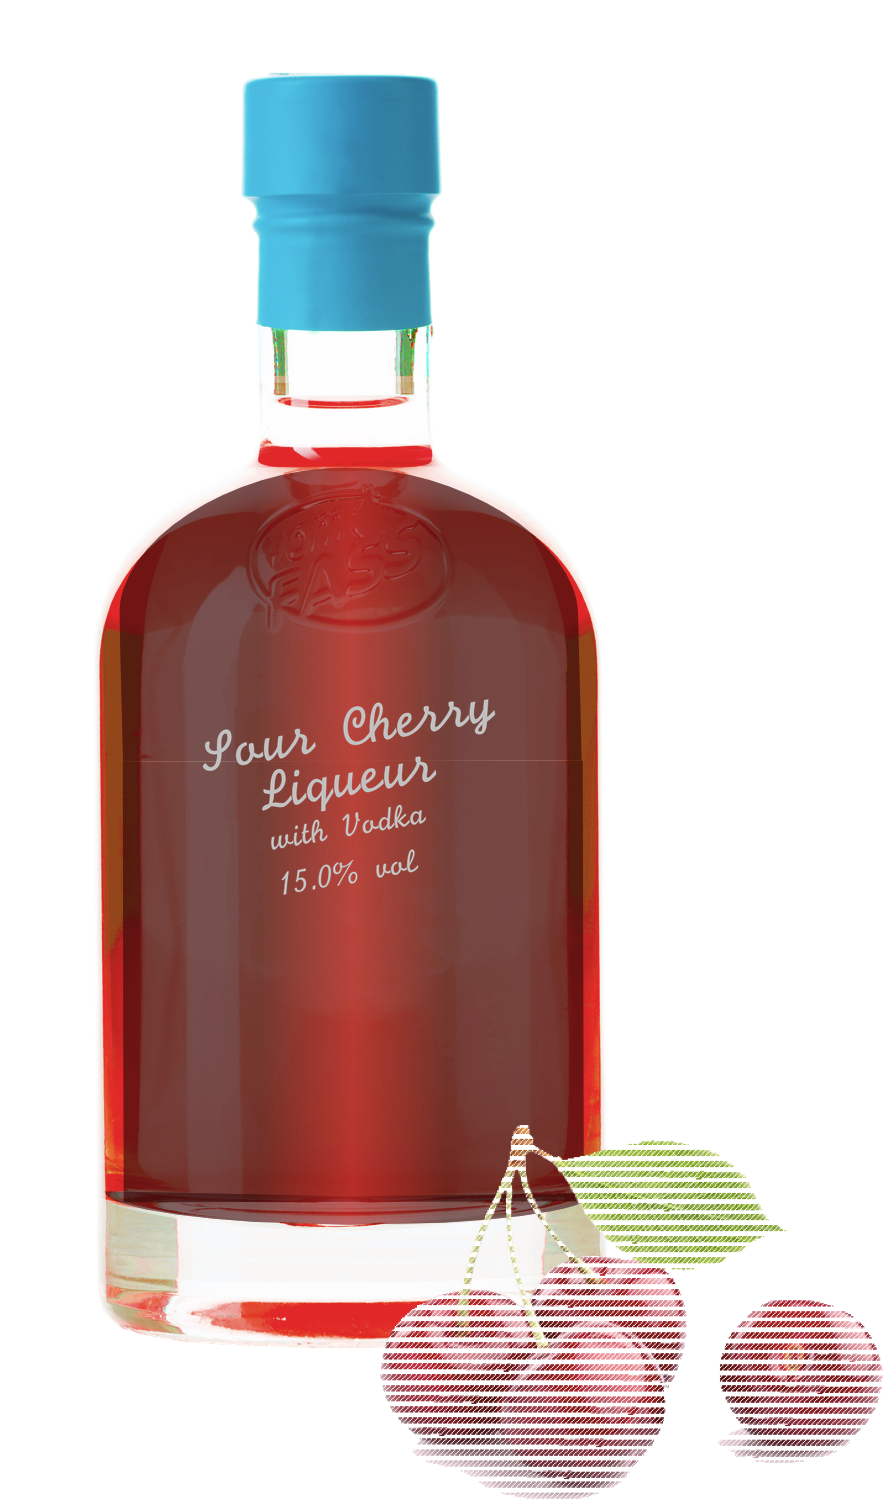 Sour-cherry with vodka